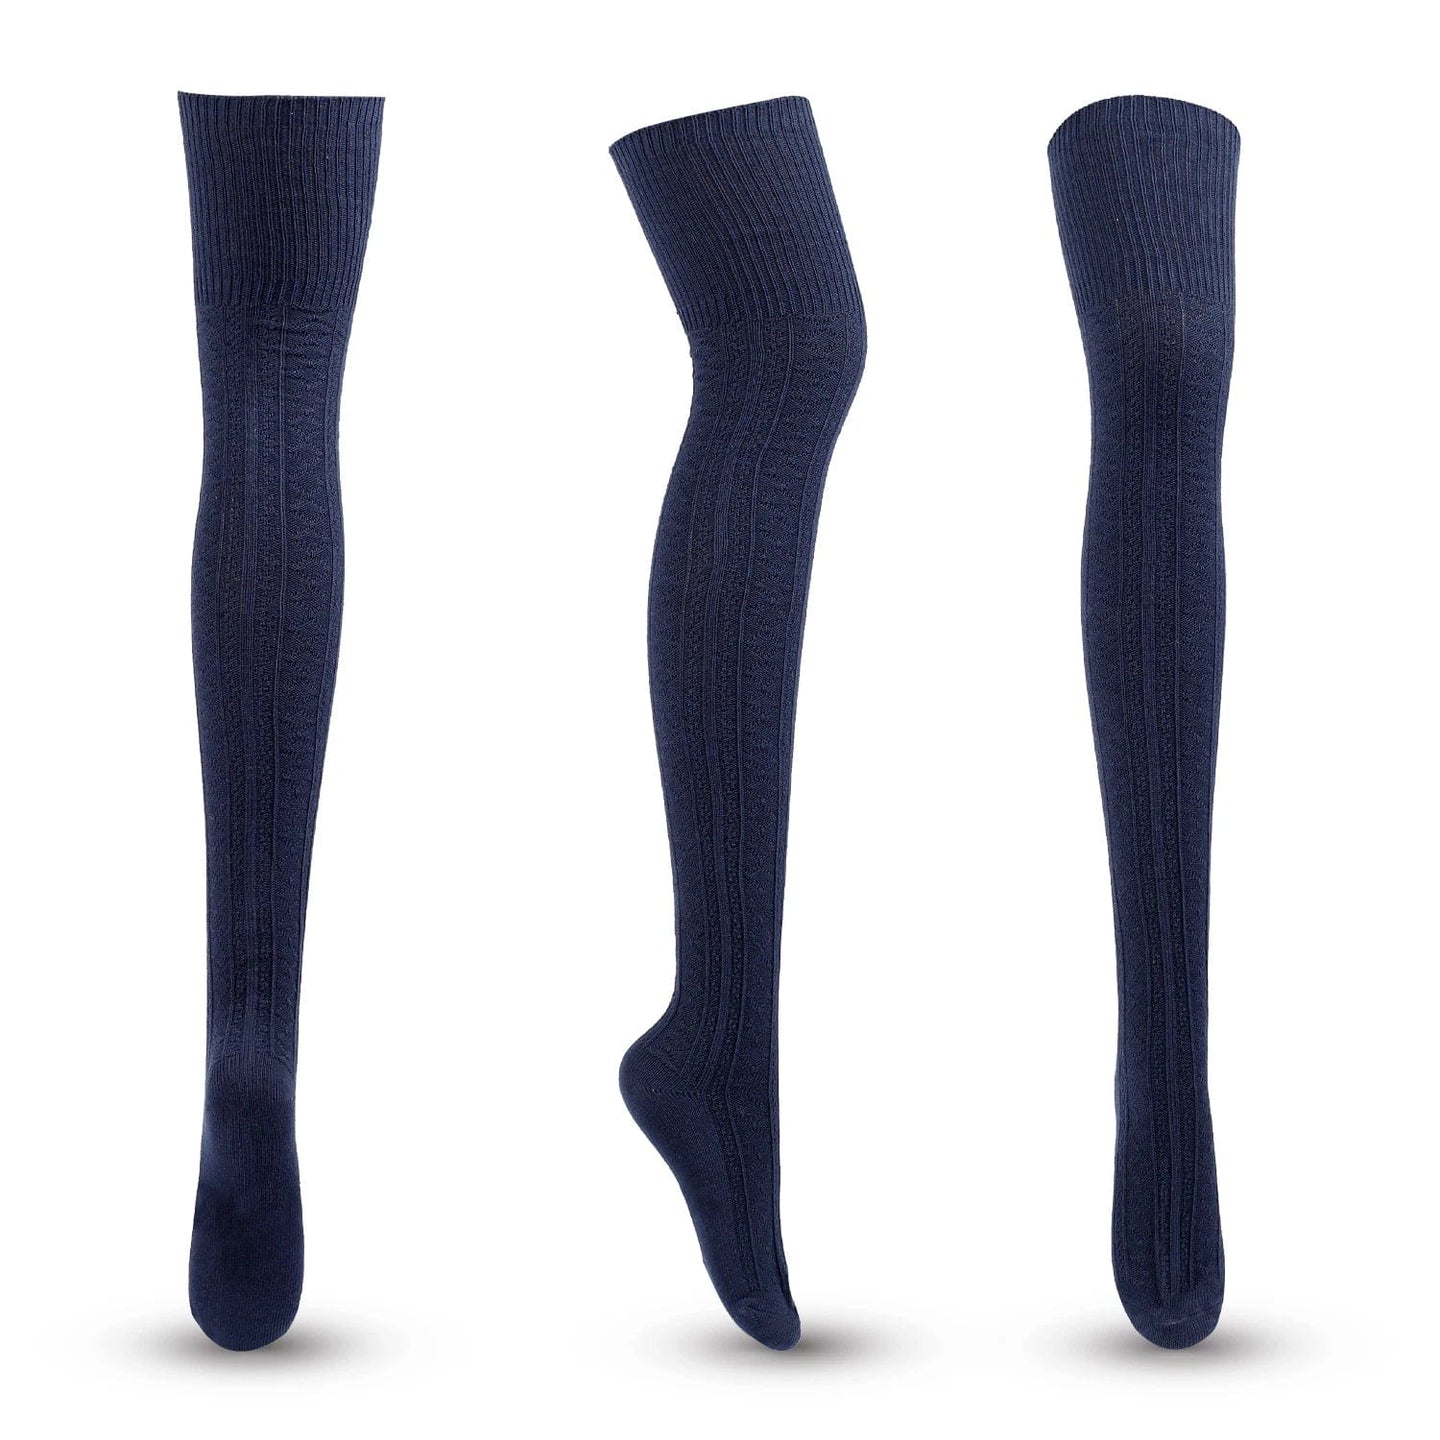 Sassy and Stylish: Fashion Meets Comfort with Our Women's Over-The-Knee Socks